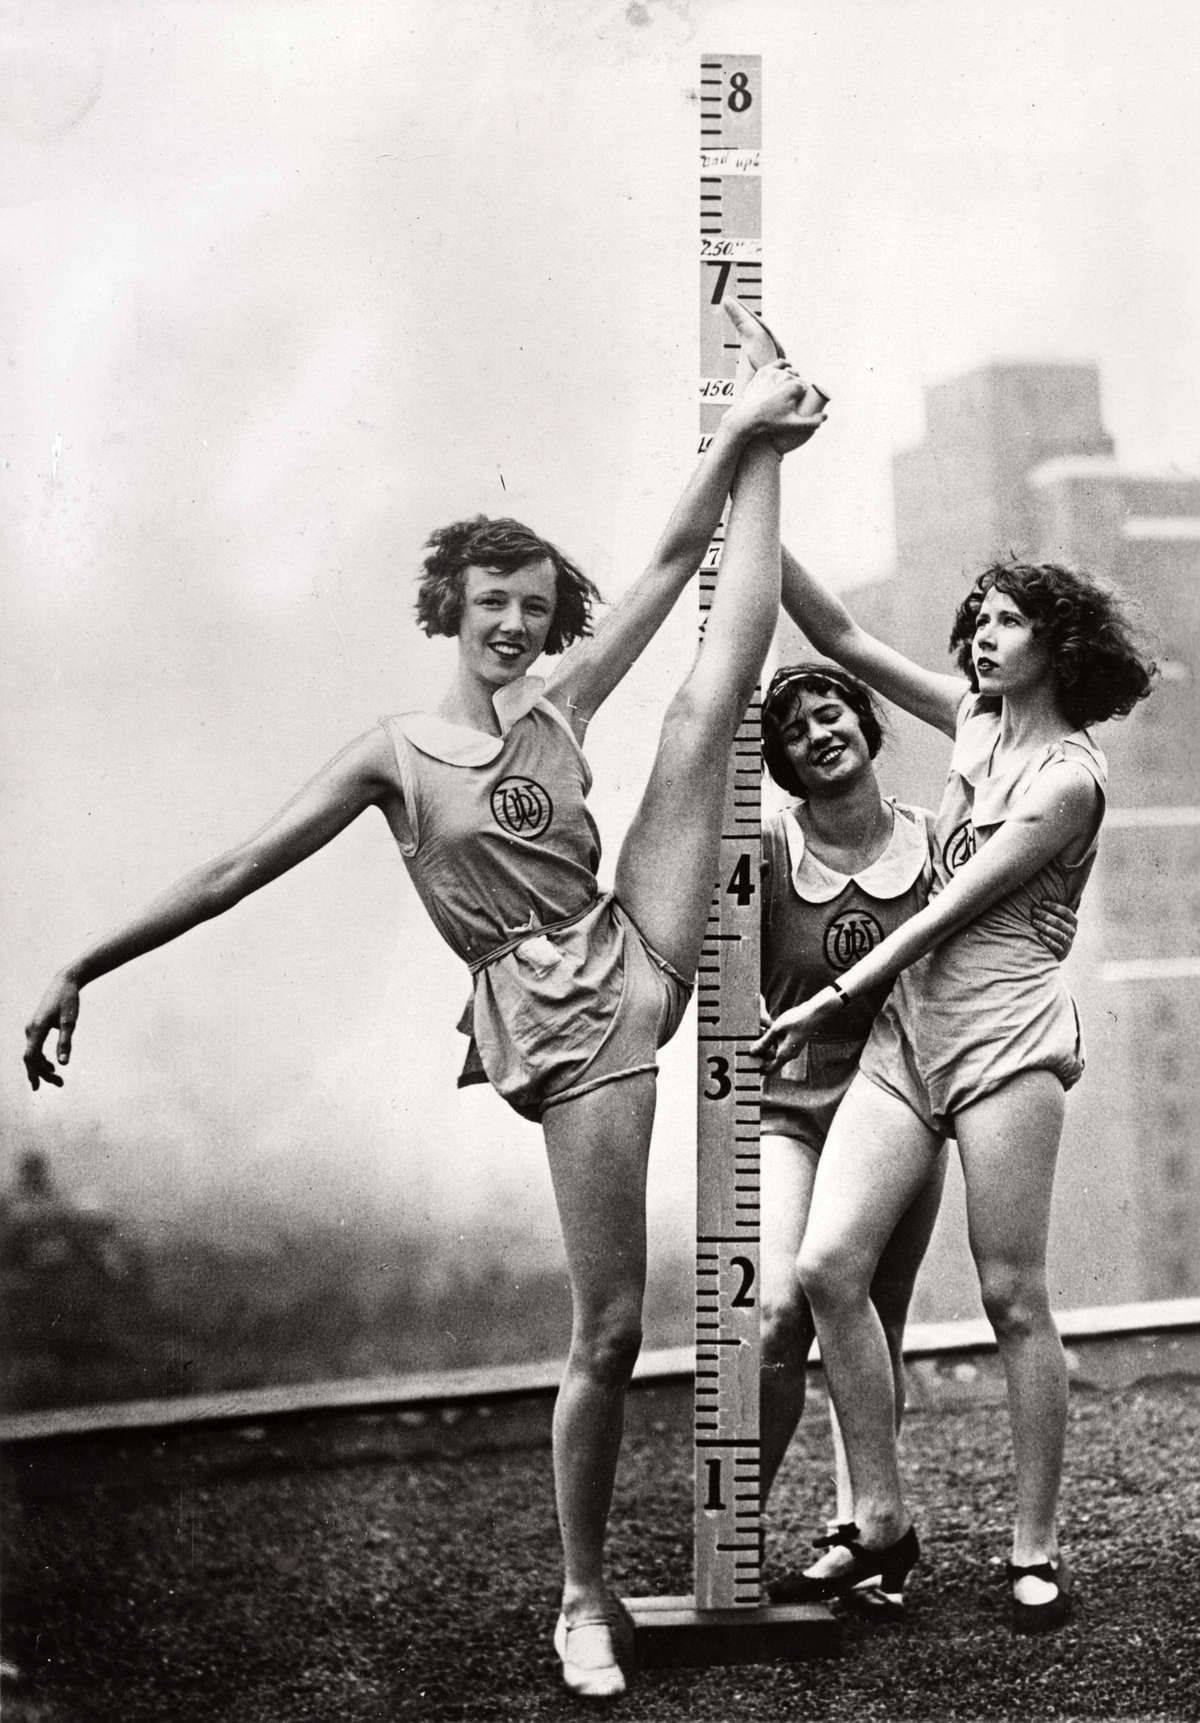 need-reality-asylum: Girls stretching legs and measuring them, New York, 1931   Source: